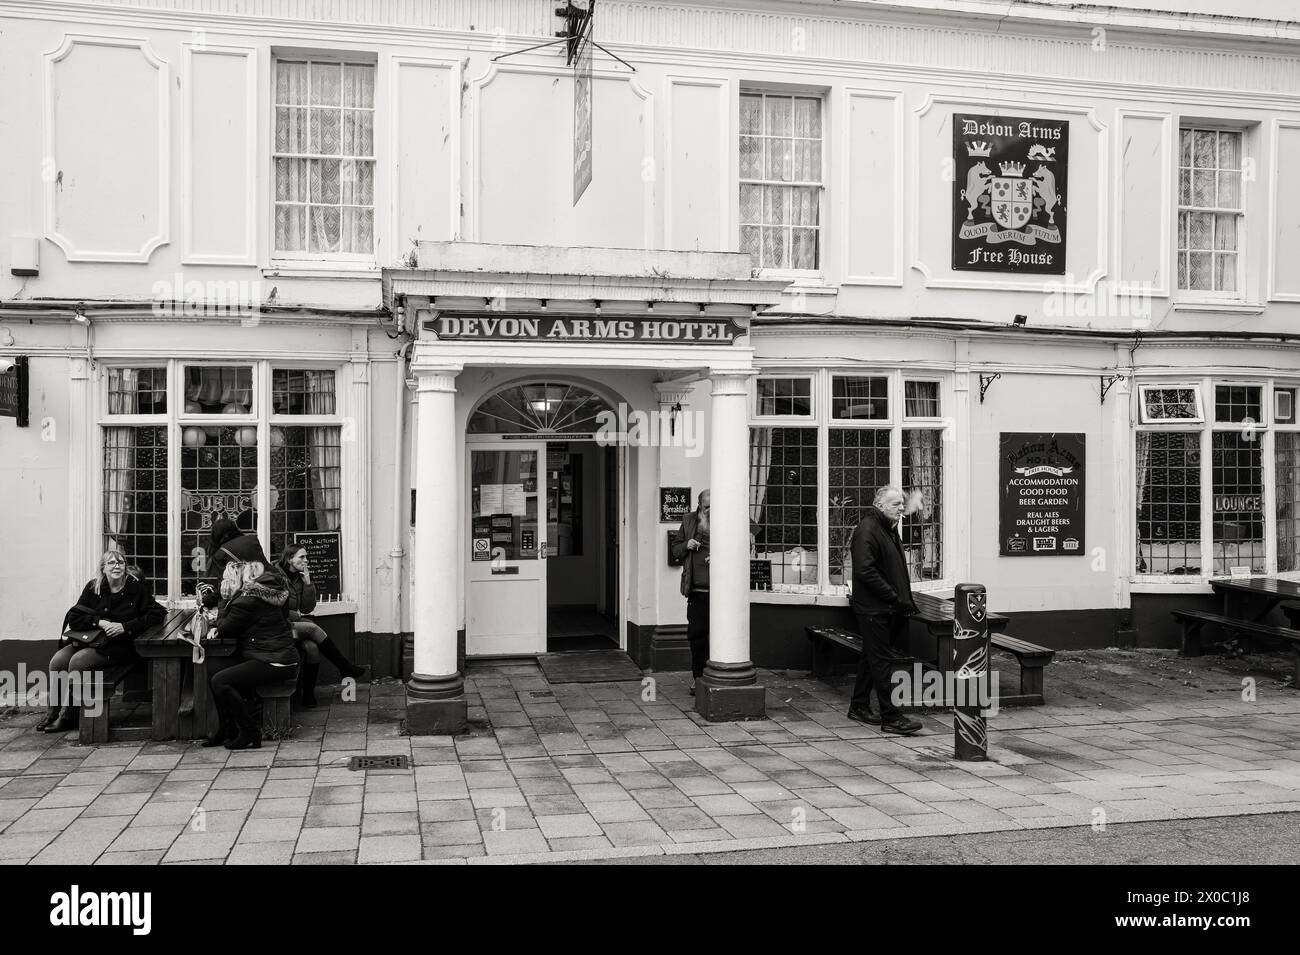 People sitting outside the Devon Arms public house in Teignmouth, Devon, UK. Black & White photography. Stock Photo